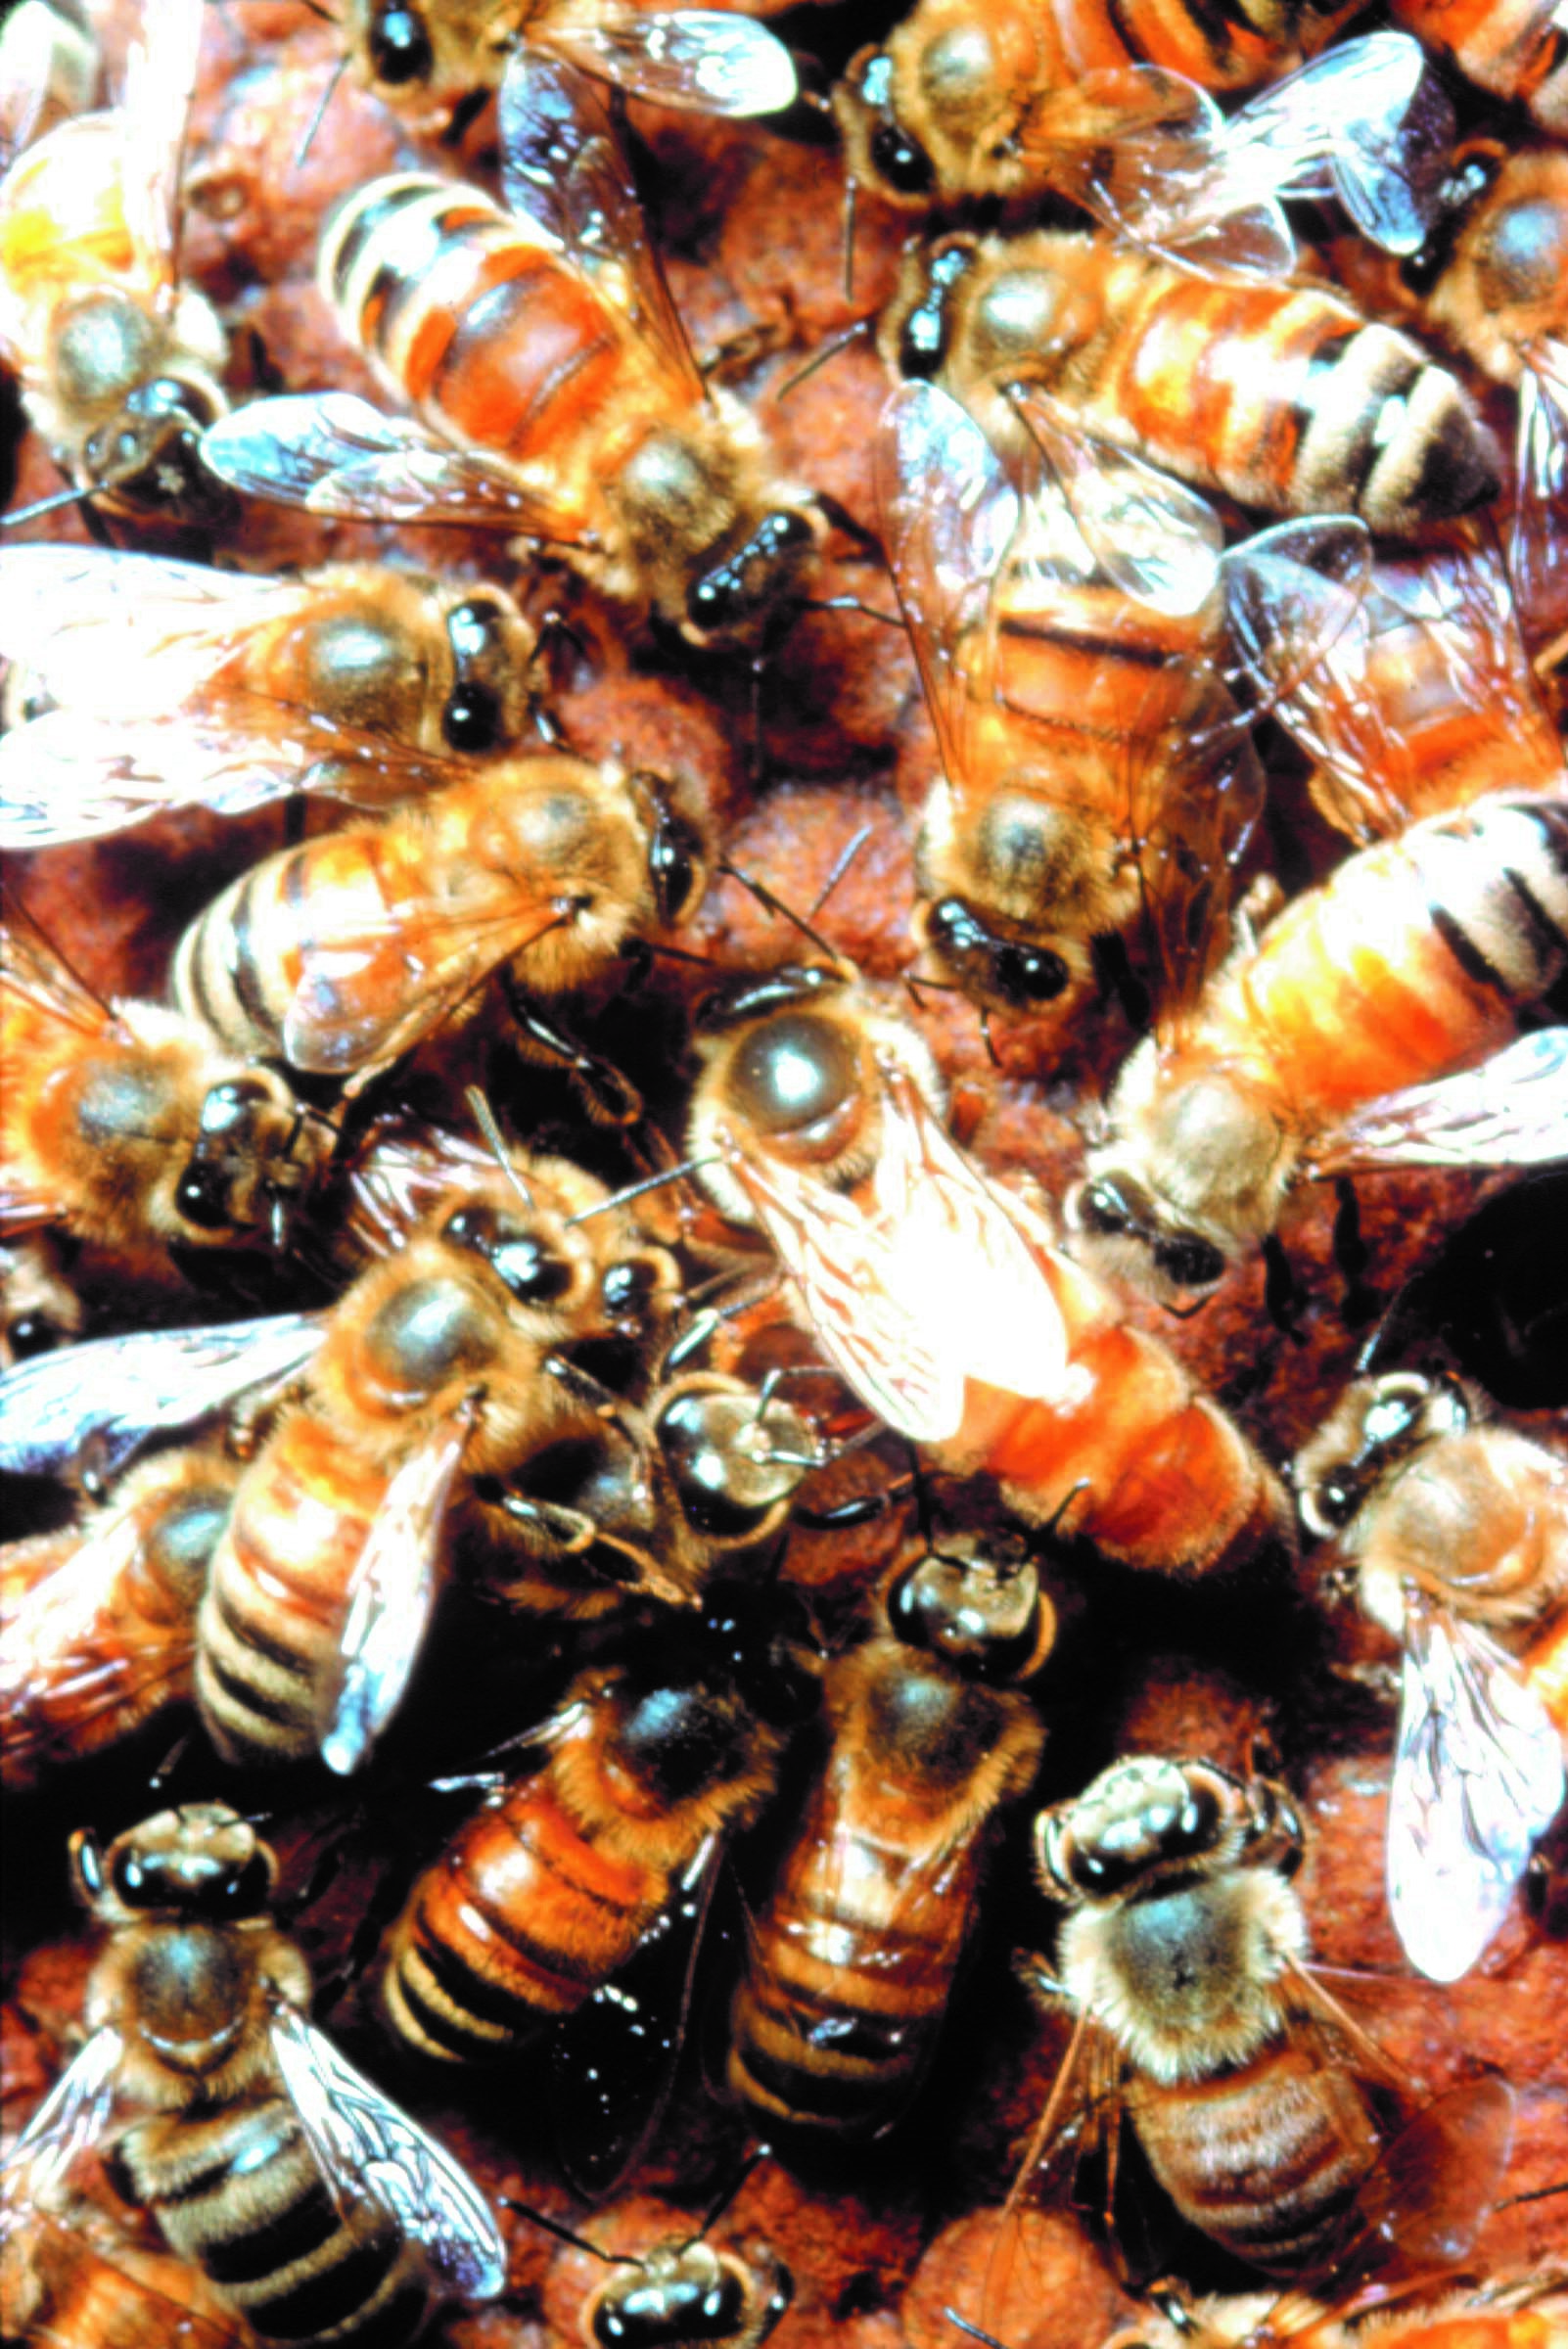 CATCH THE BUZZ – Researchers identify how queen bees repress workers’ fertility